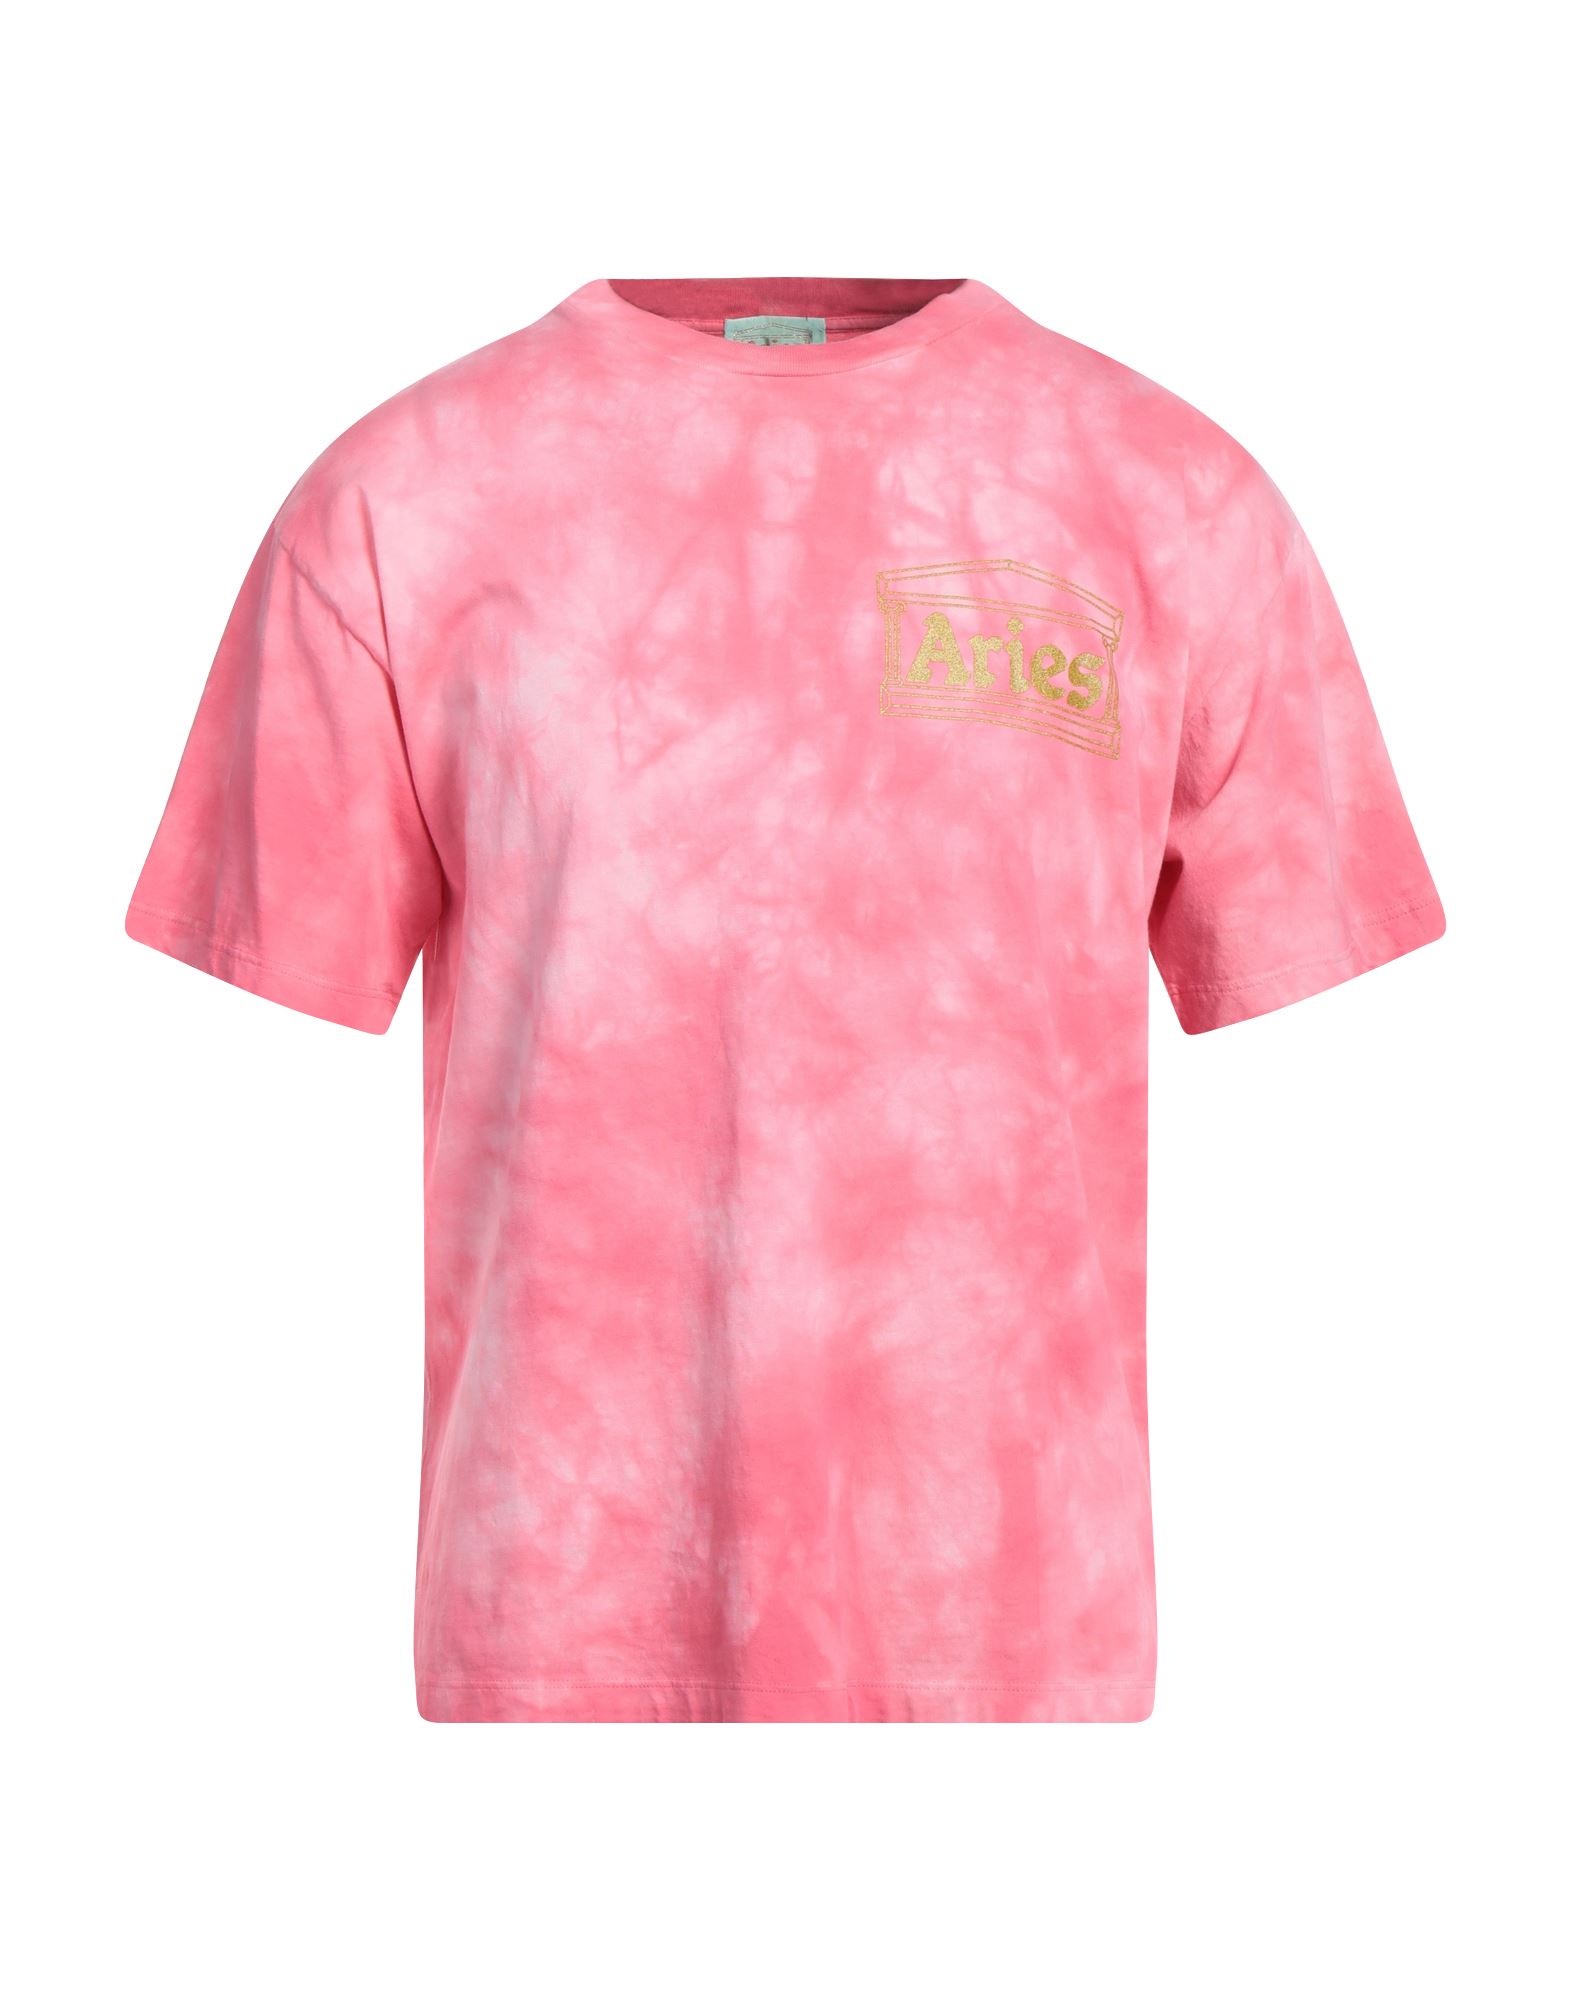 Aries T-shirts In Pink